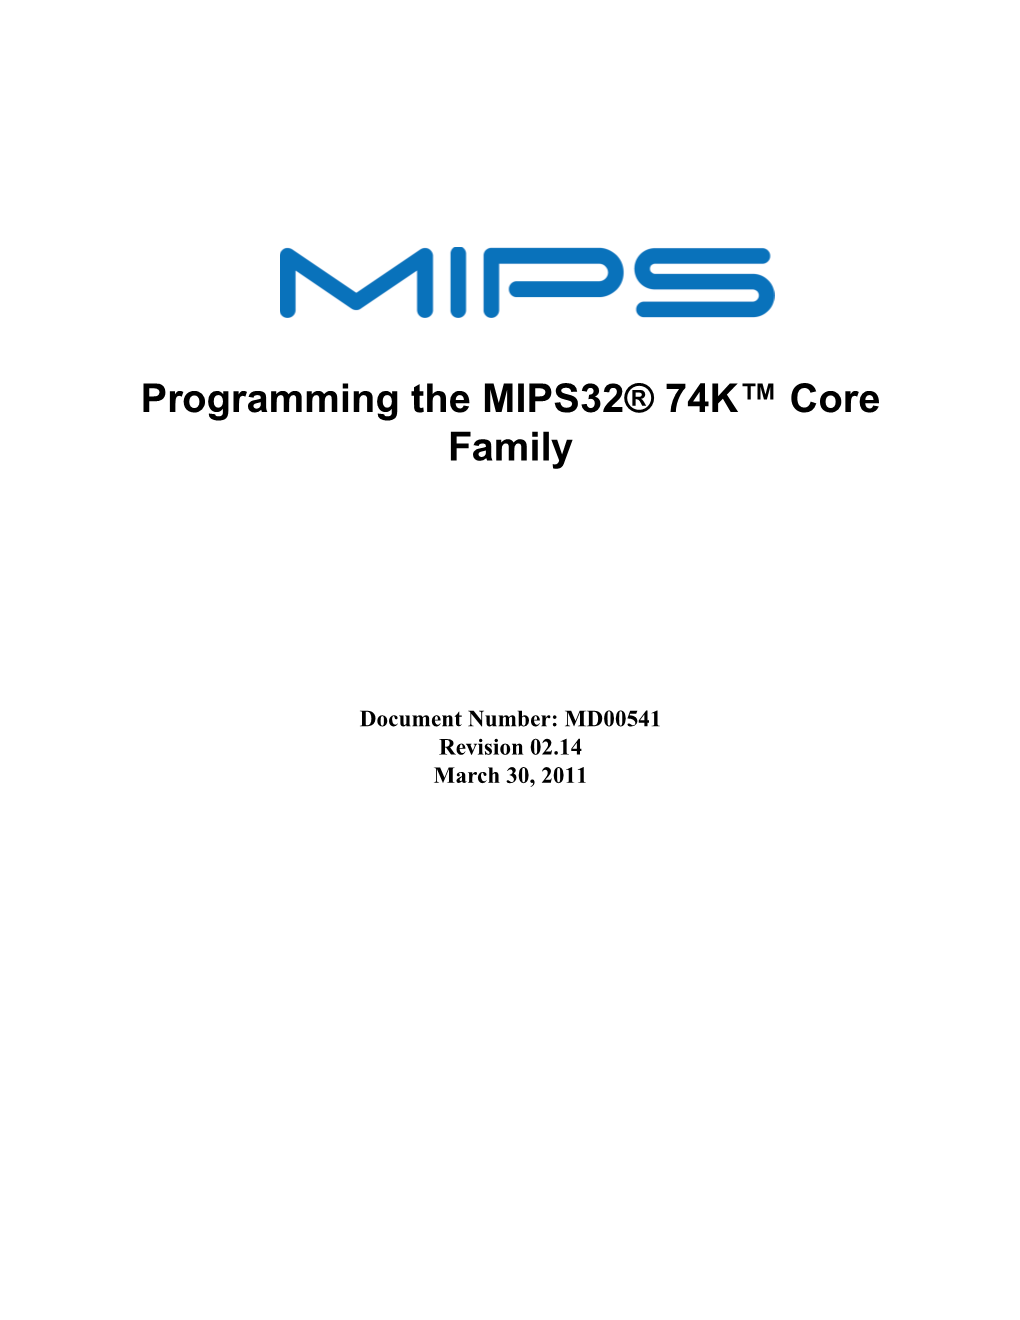 Programming the MIPS32® 74K™ Core Family, Revision 02.14